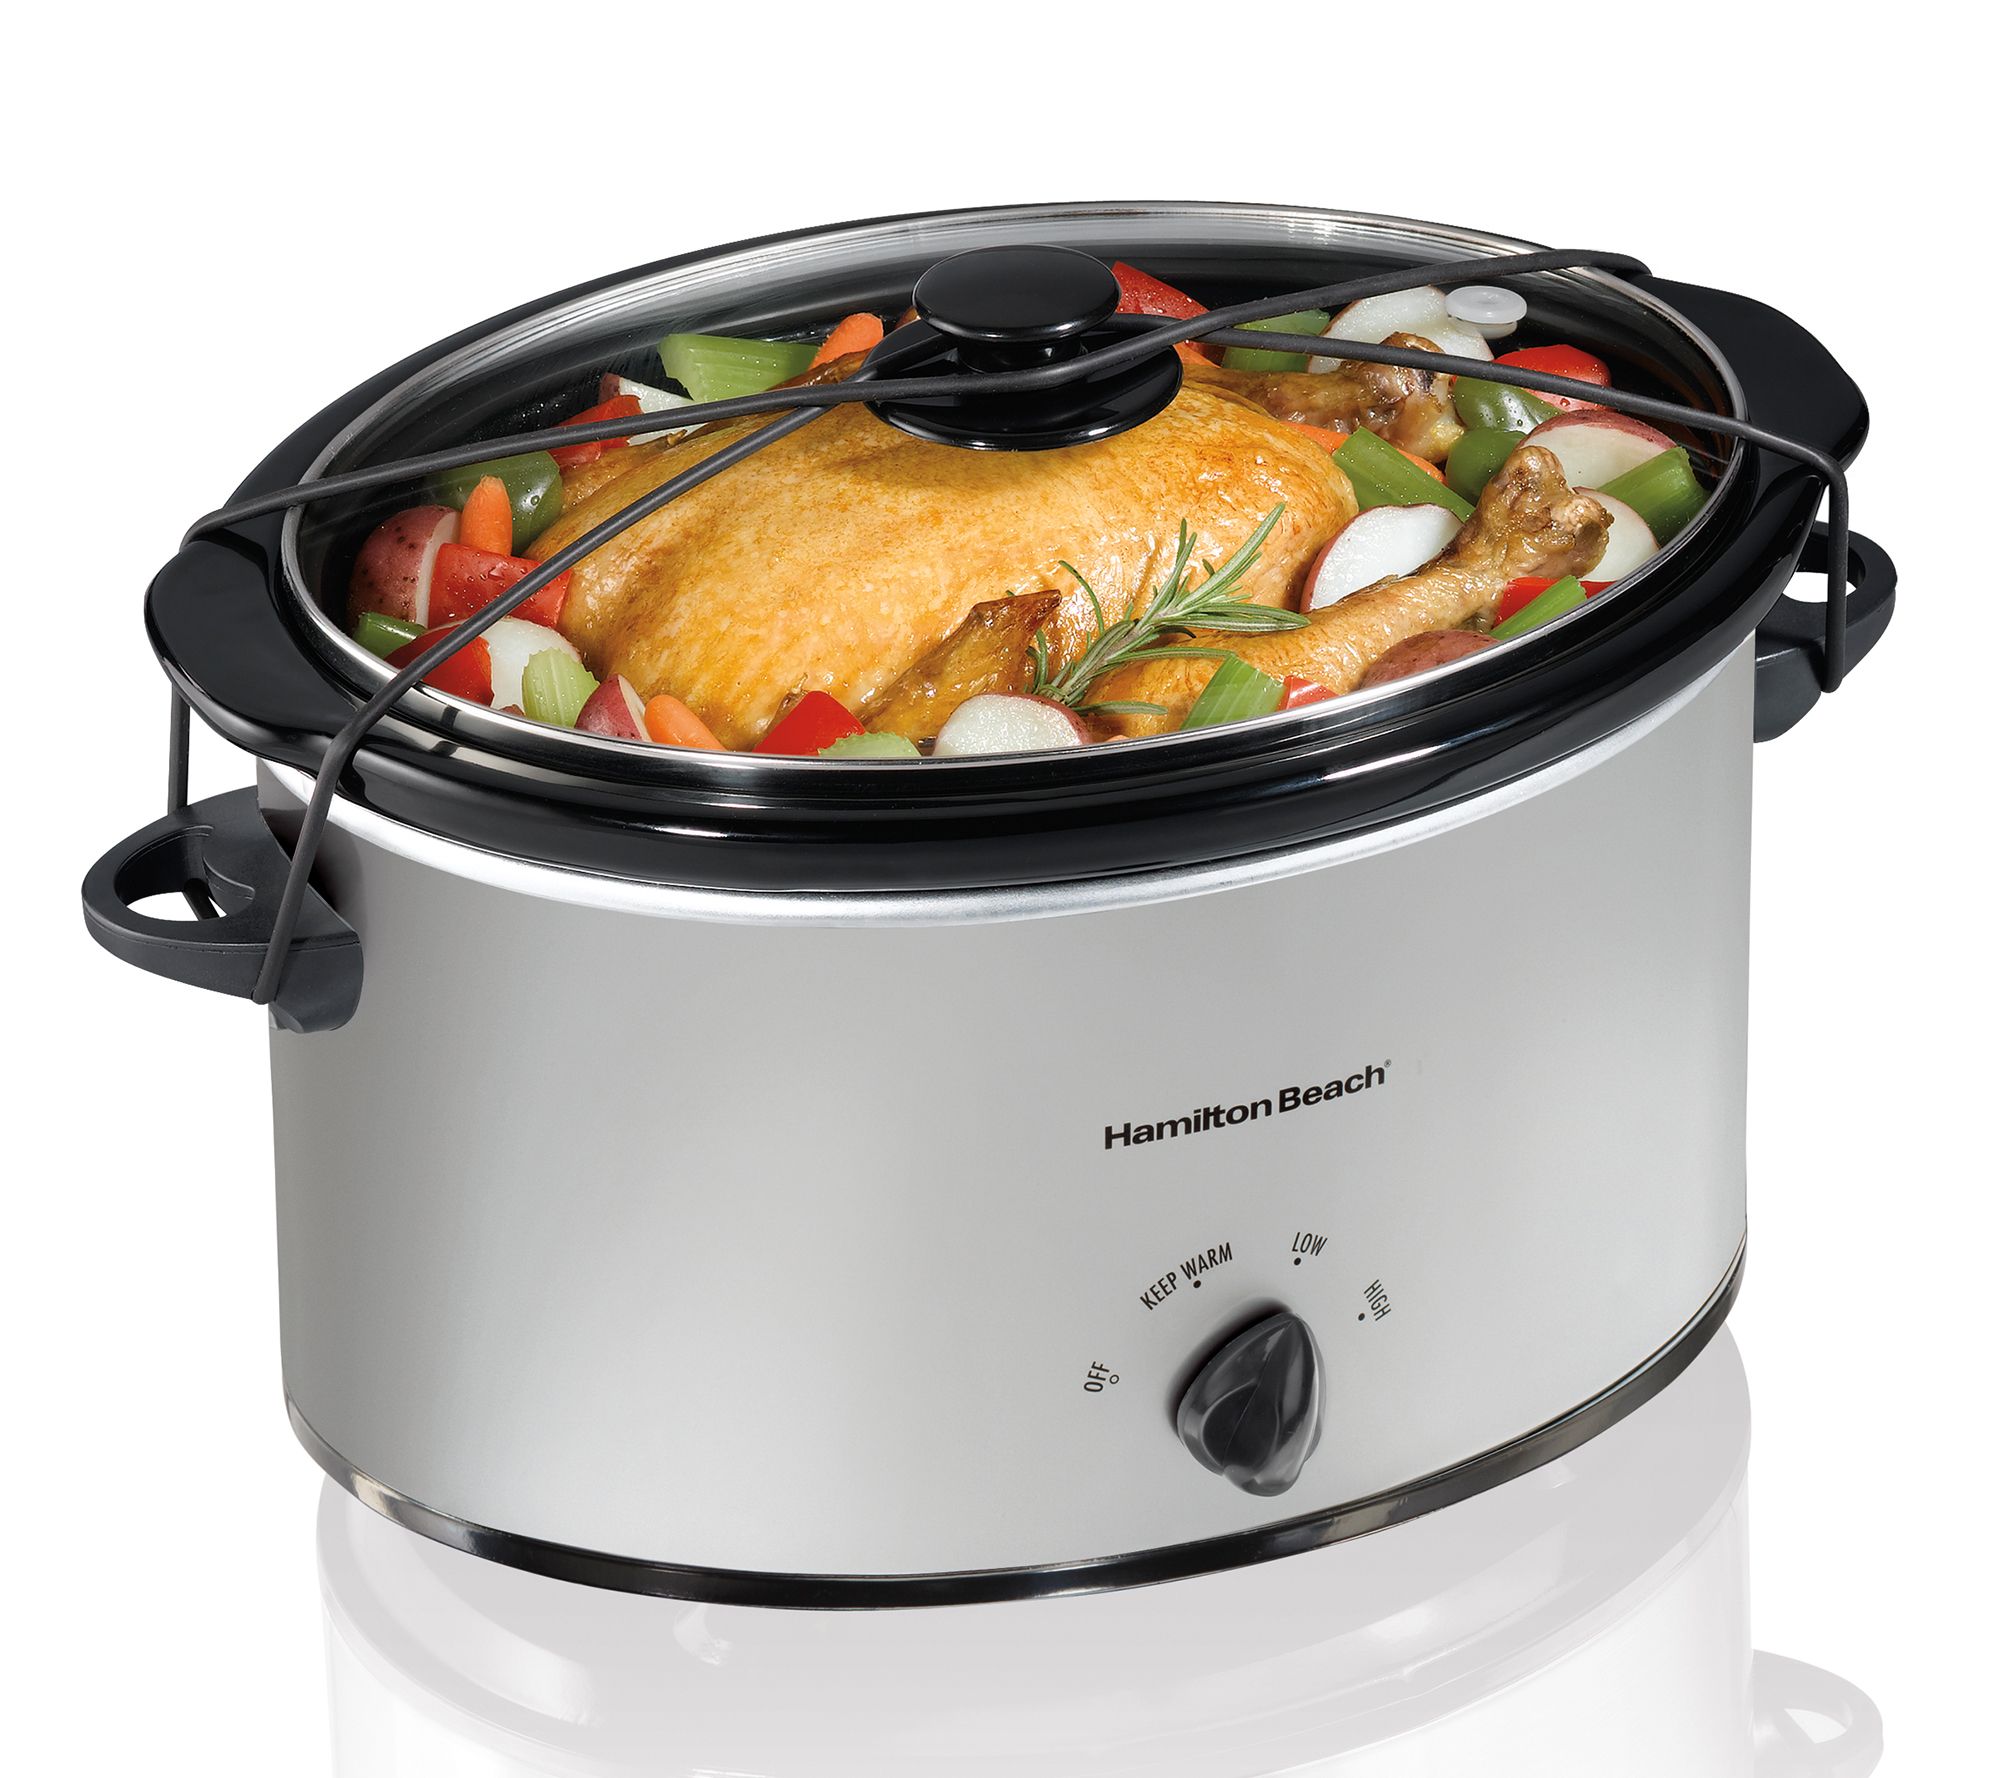 Hamilton Beach 8-Quart Stainless Steel Oval Slow Cooker in the